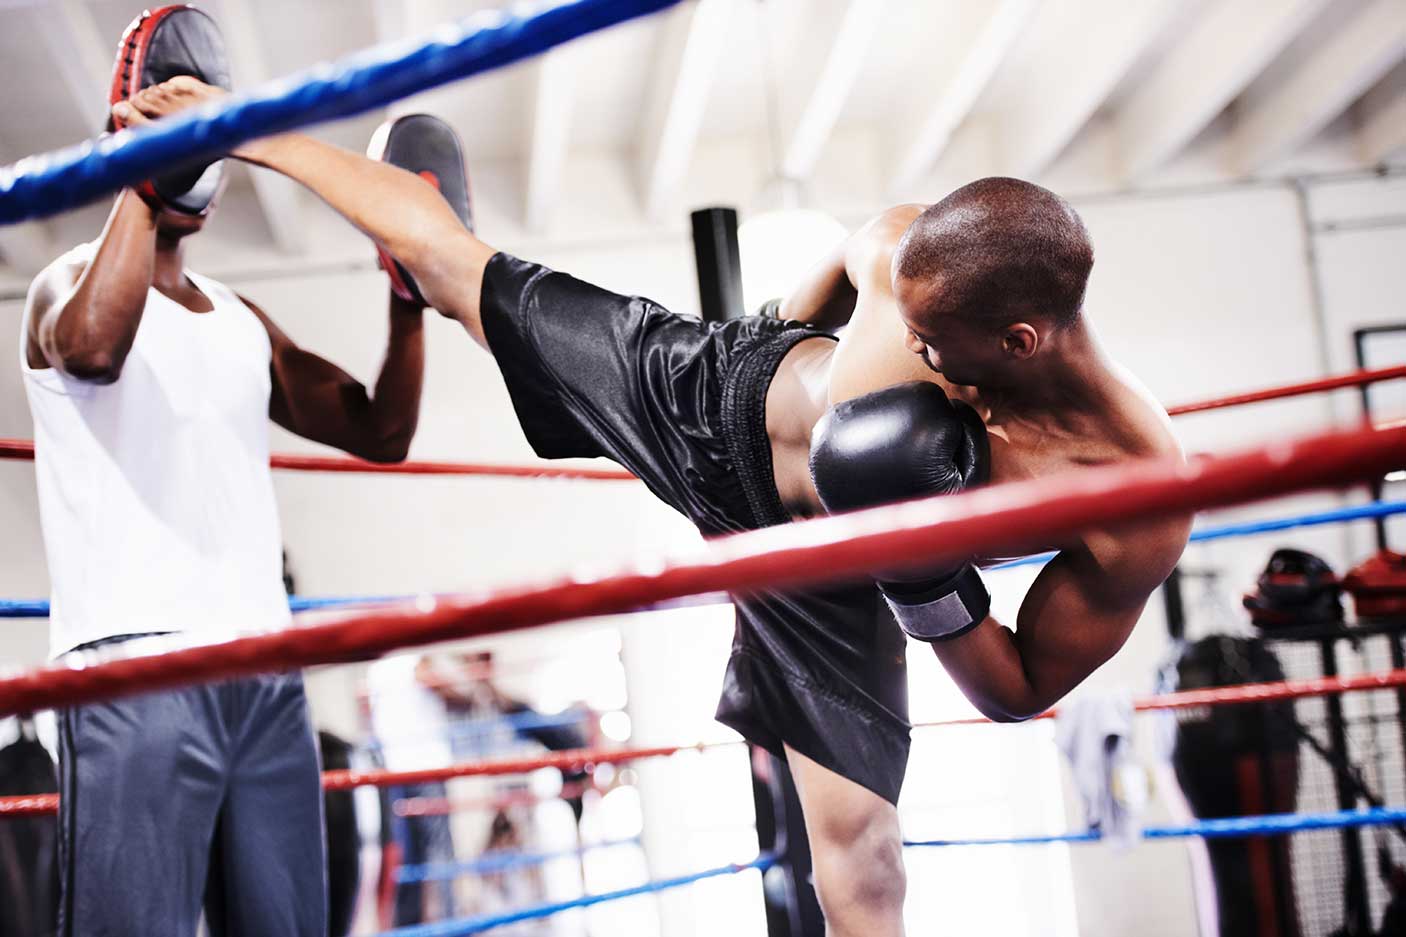 A kickboxer launching a high kick at his sparring partner's gloves